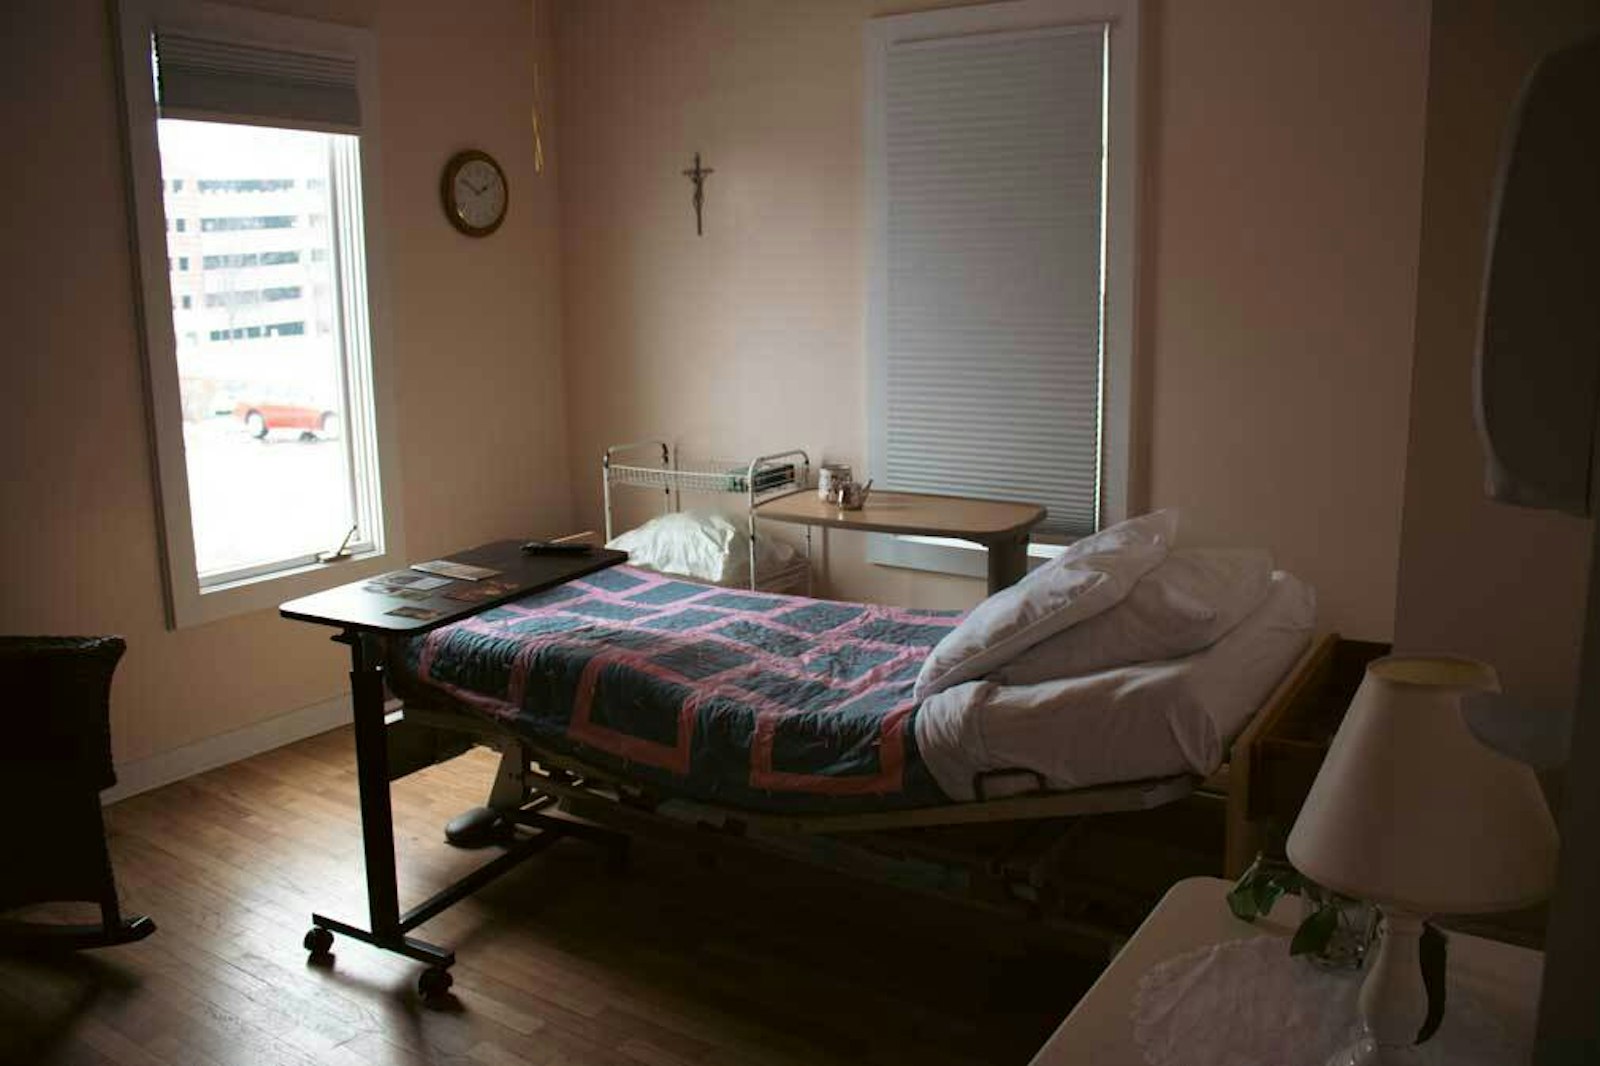 One of the guest bedrooms at Mother Teresa House, a home-based hospice ministry in Lansing that provides around-the-clock care for the terminally ill at no charge to them or their families.